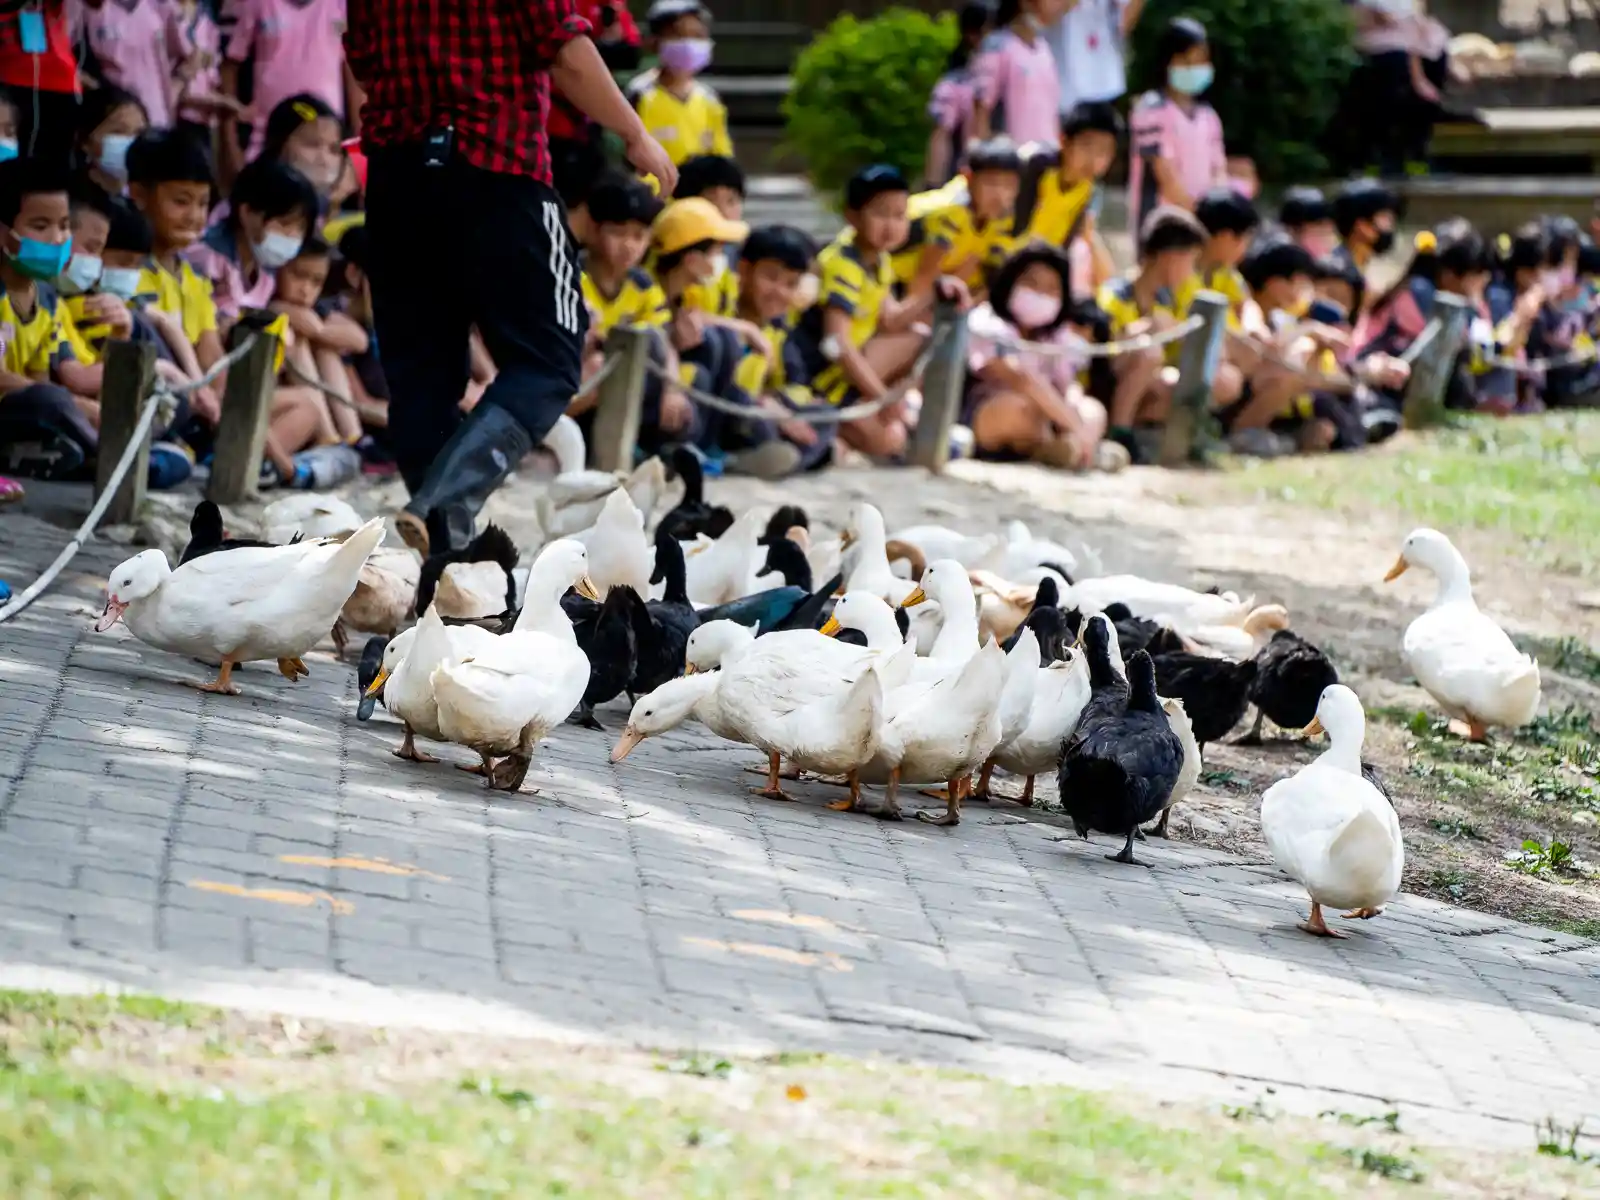 A group of school children is sitting observing a group of ducks.